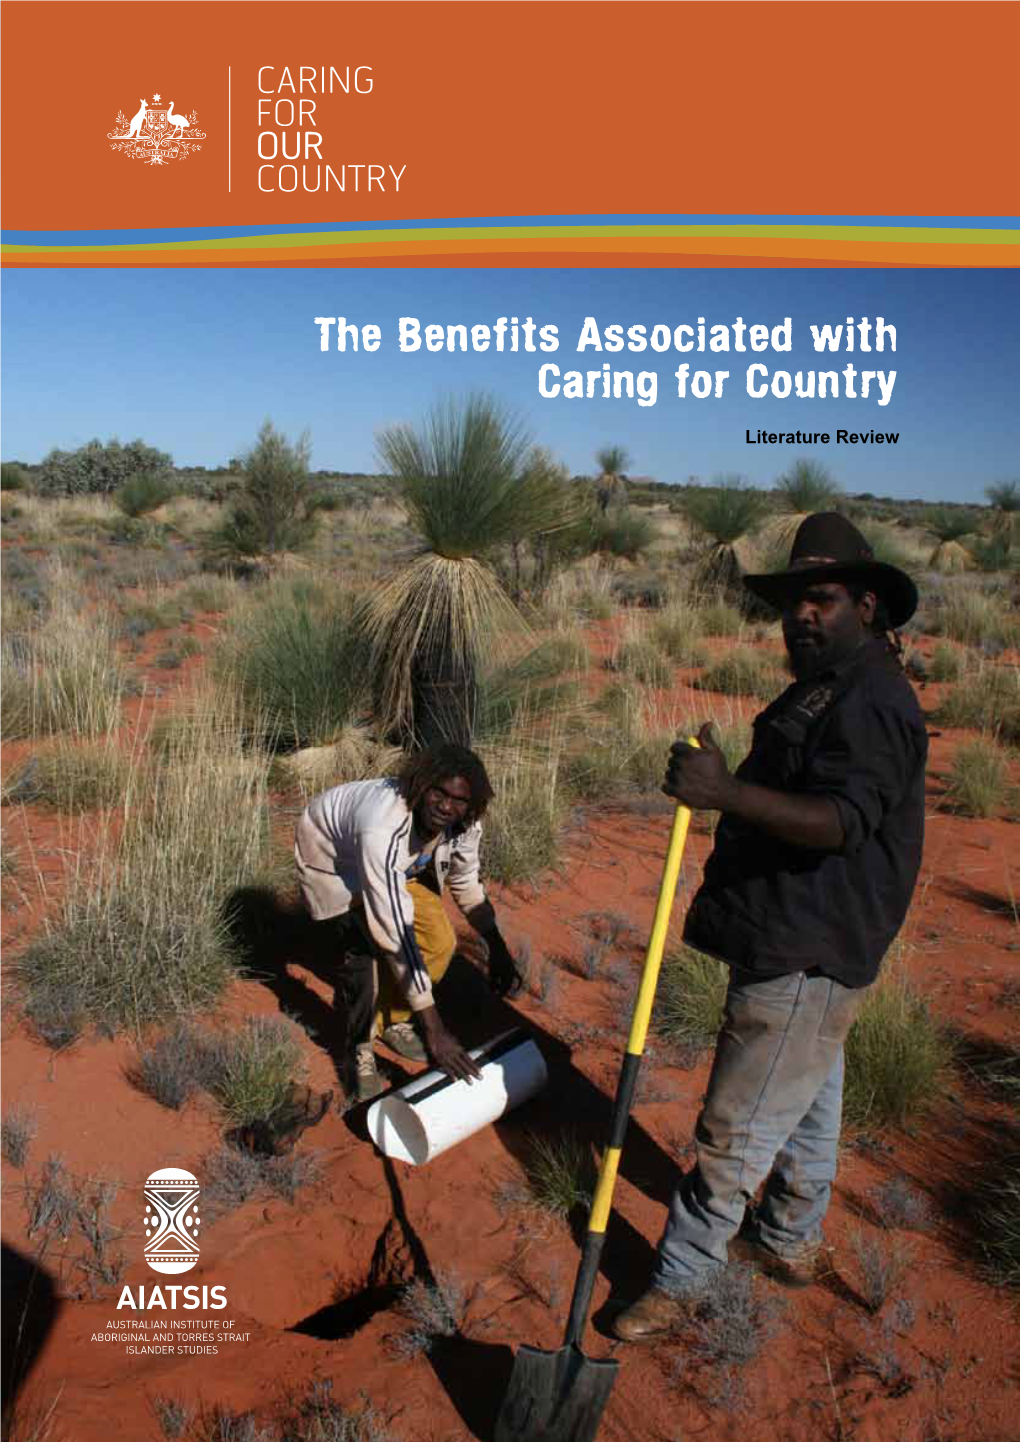 The Benefits Associated with Caring for Country